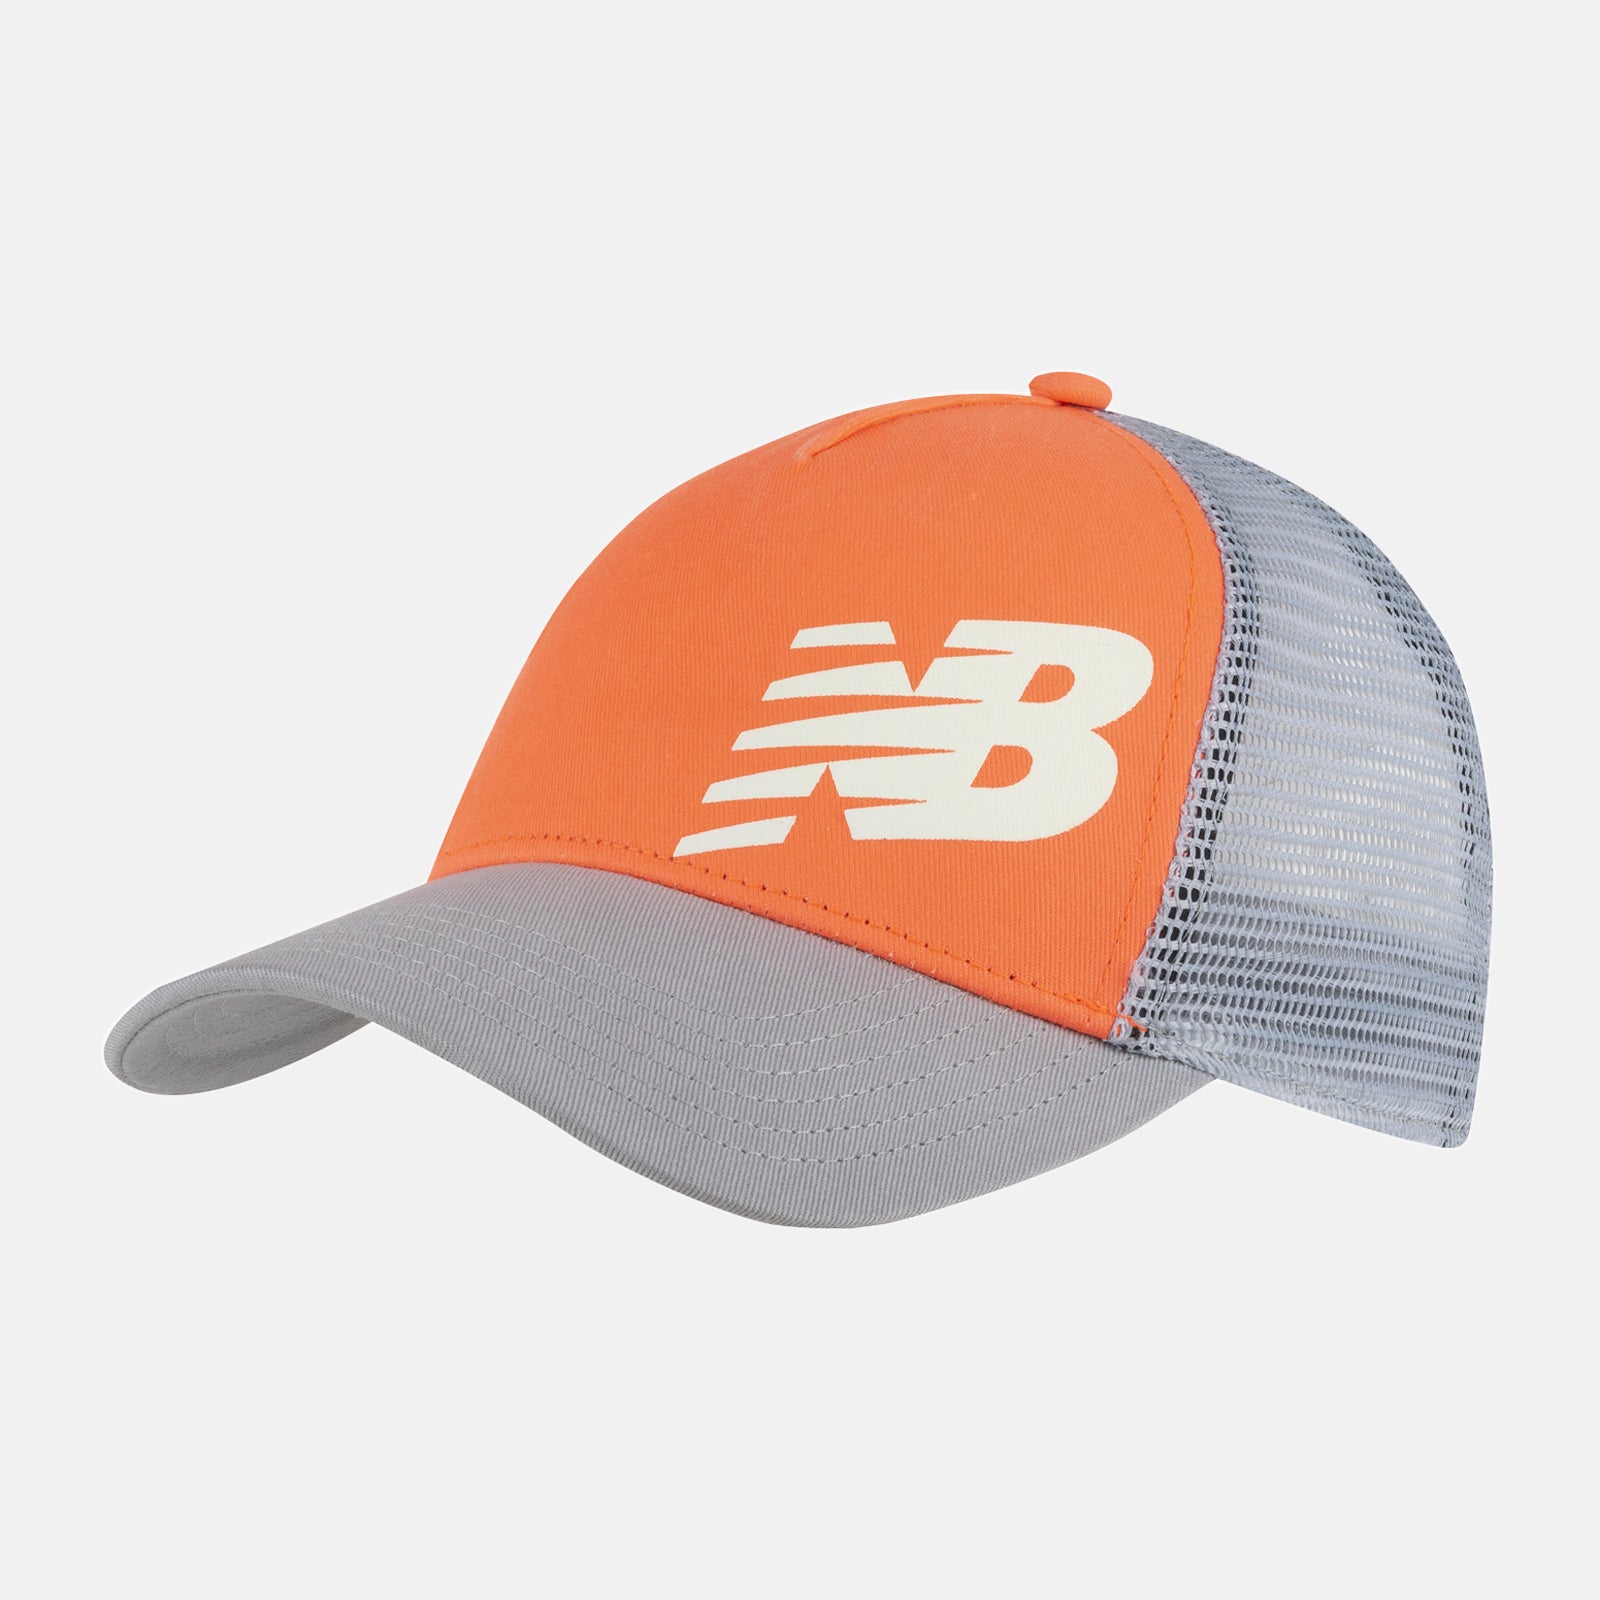 NEW BALANCE Kid&#39;s Trucker Hat in Orange LAH31008 O/S ORANGE FROM EIGHTYWINGOLD - OFFICIAL BRAND PARTNER